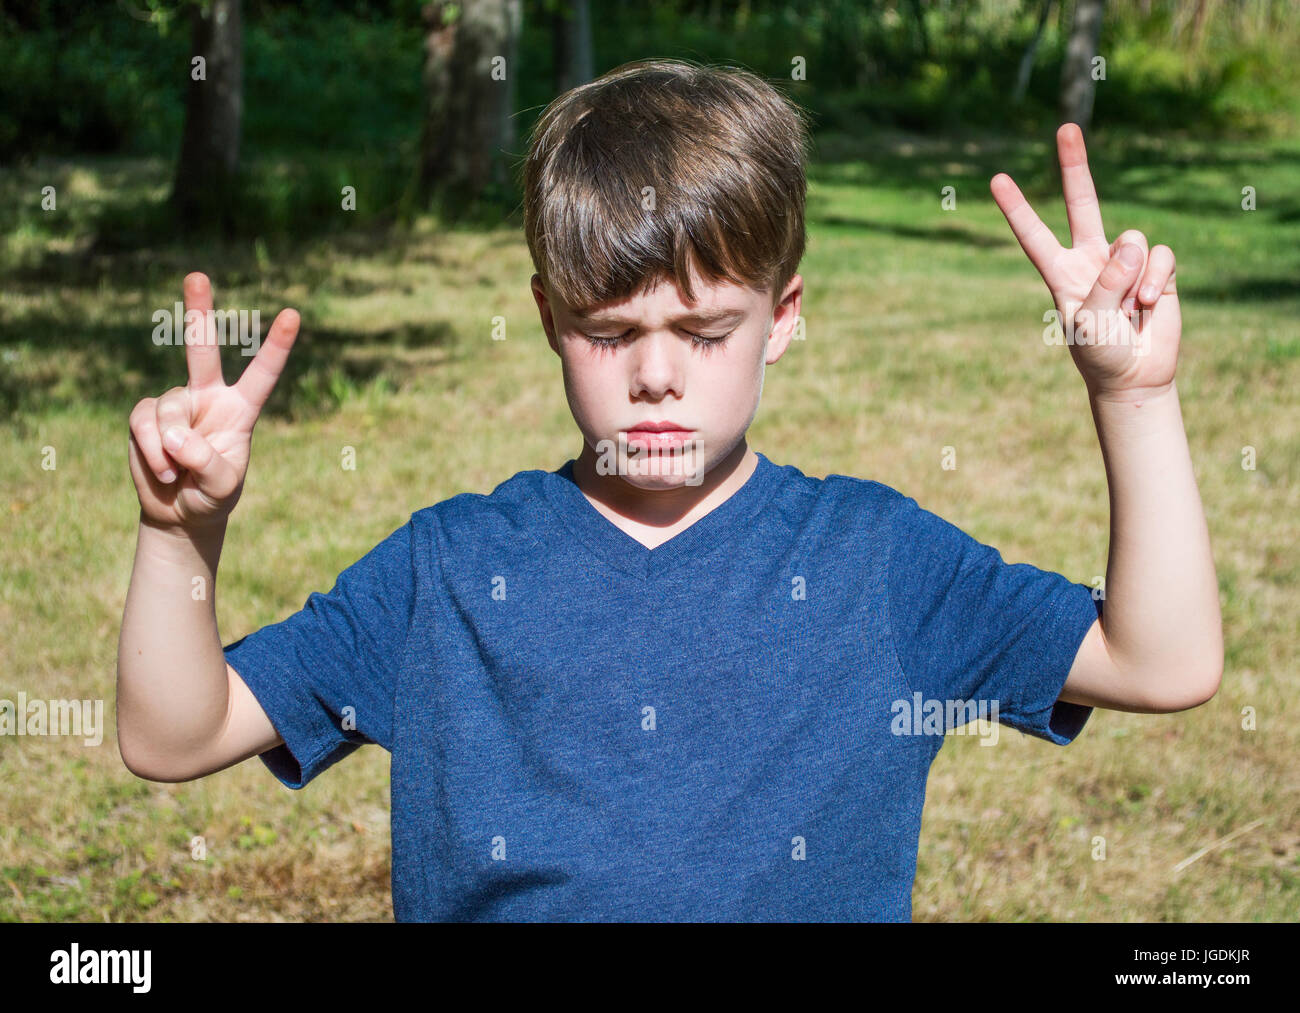 caucasian young boy making peace signs with his fingers outdoors Stock Photo